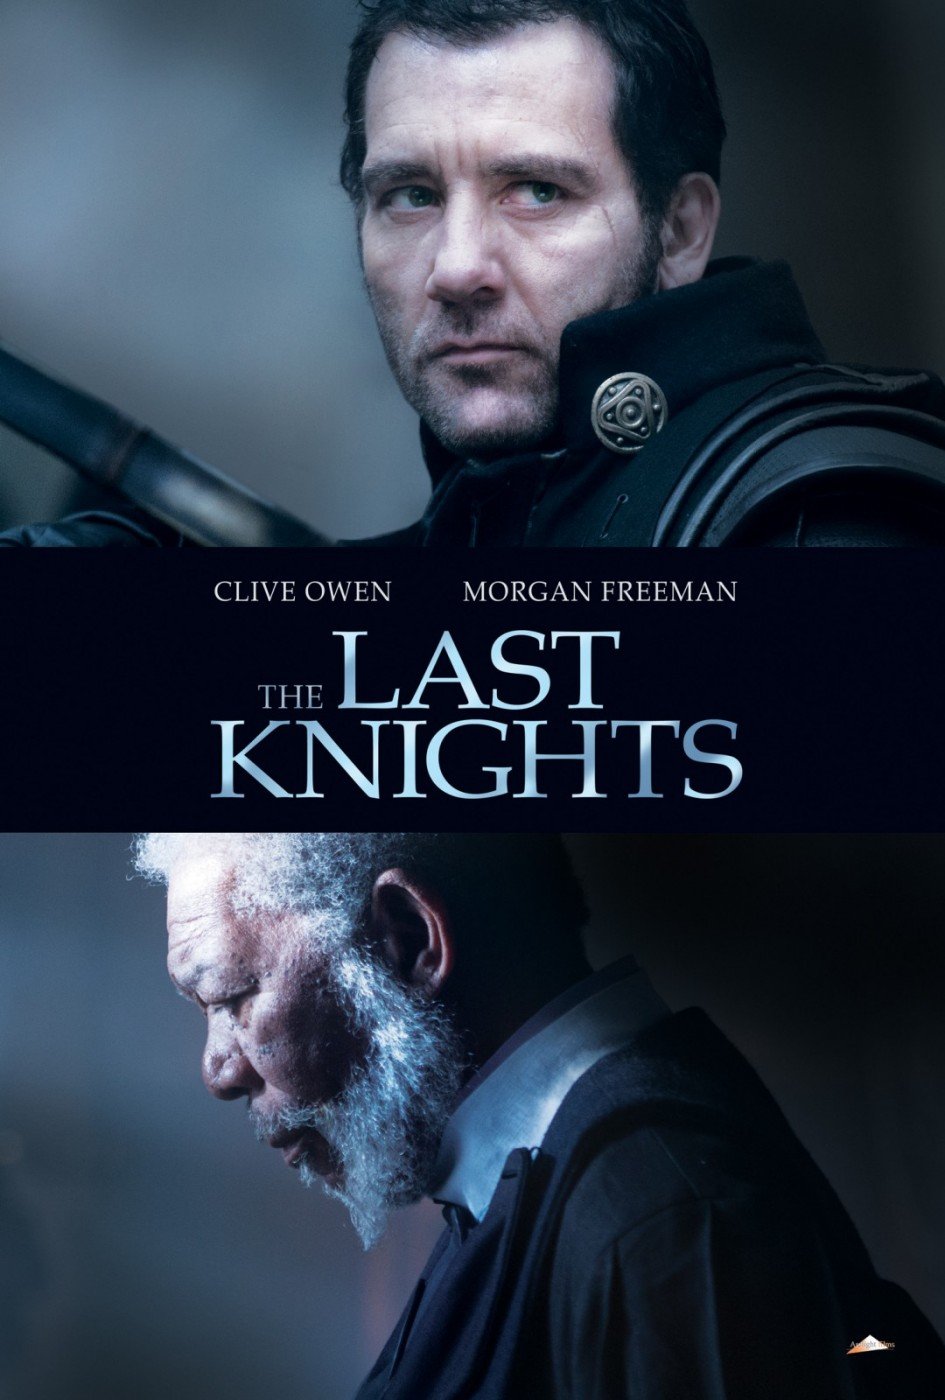 The Last Knights trailer